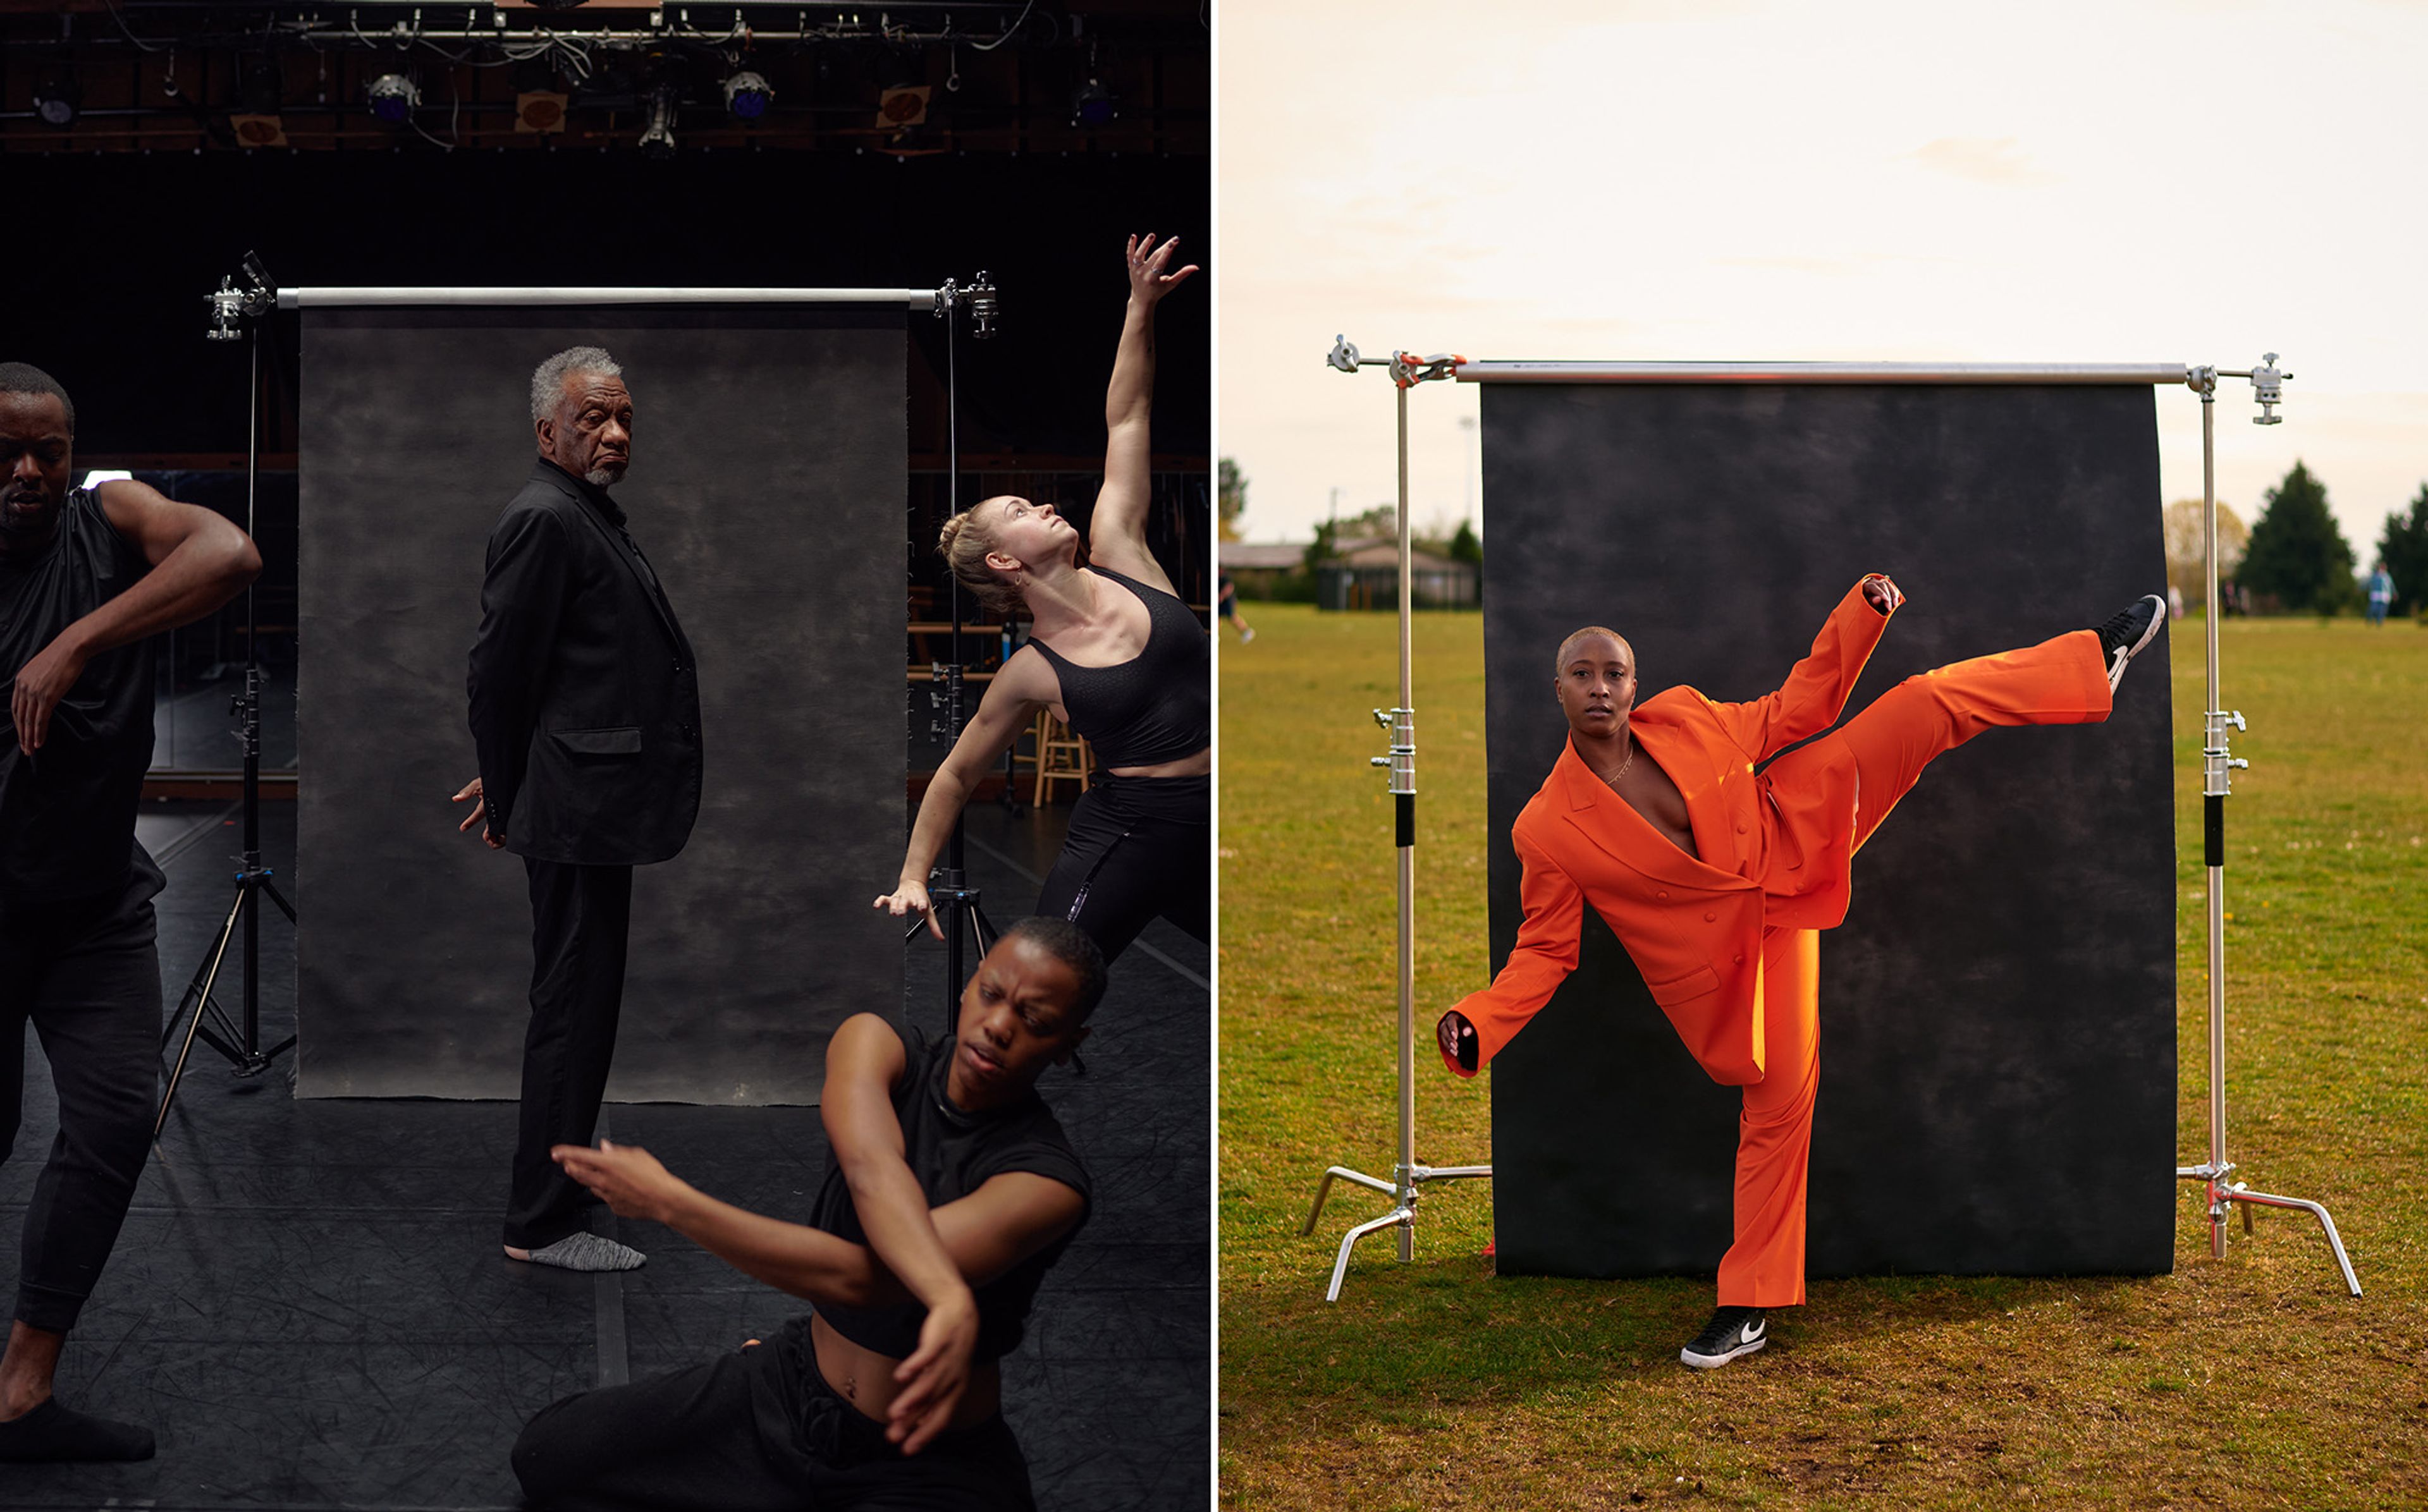 left: a man in a black suit stands in front of a black backdrop surrounded by three dancers, right: a woman in an orange suit stands with one leg raised in front of a black backdrop on a grass field